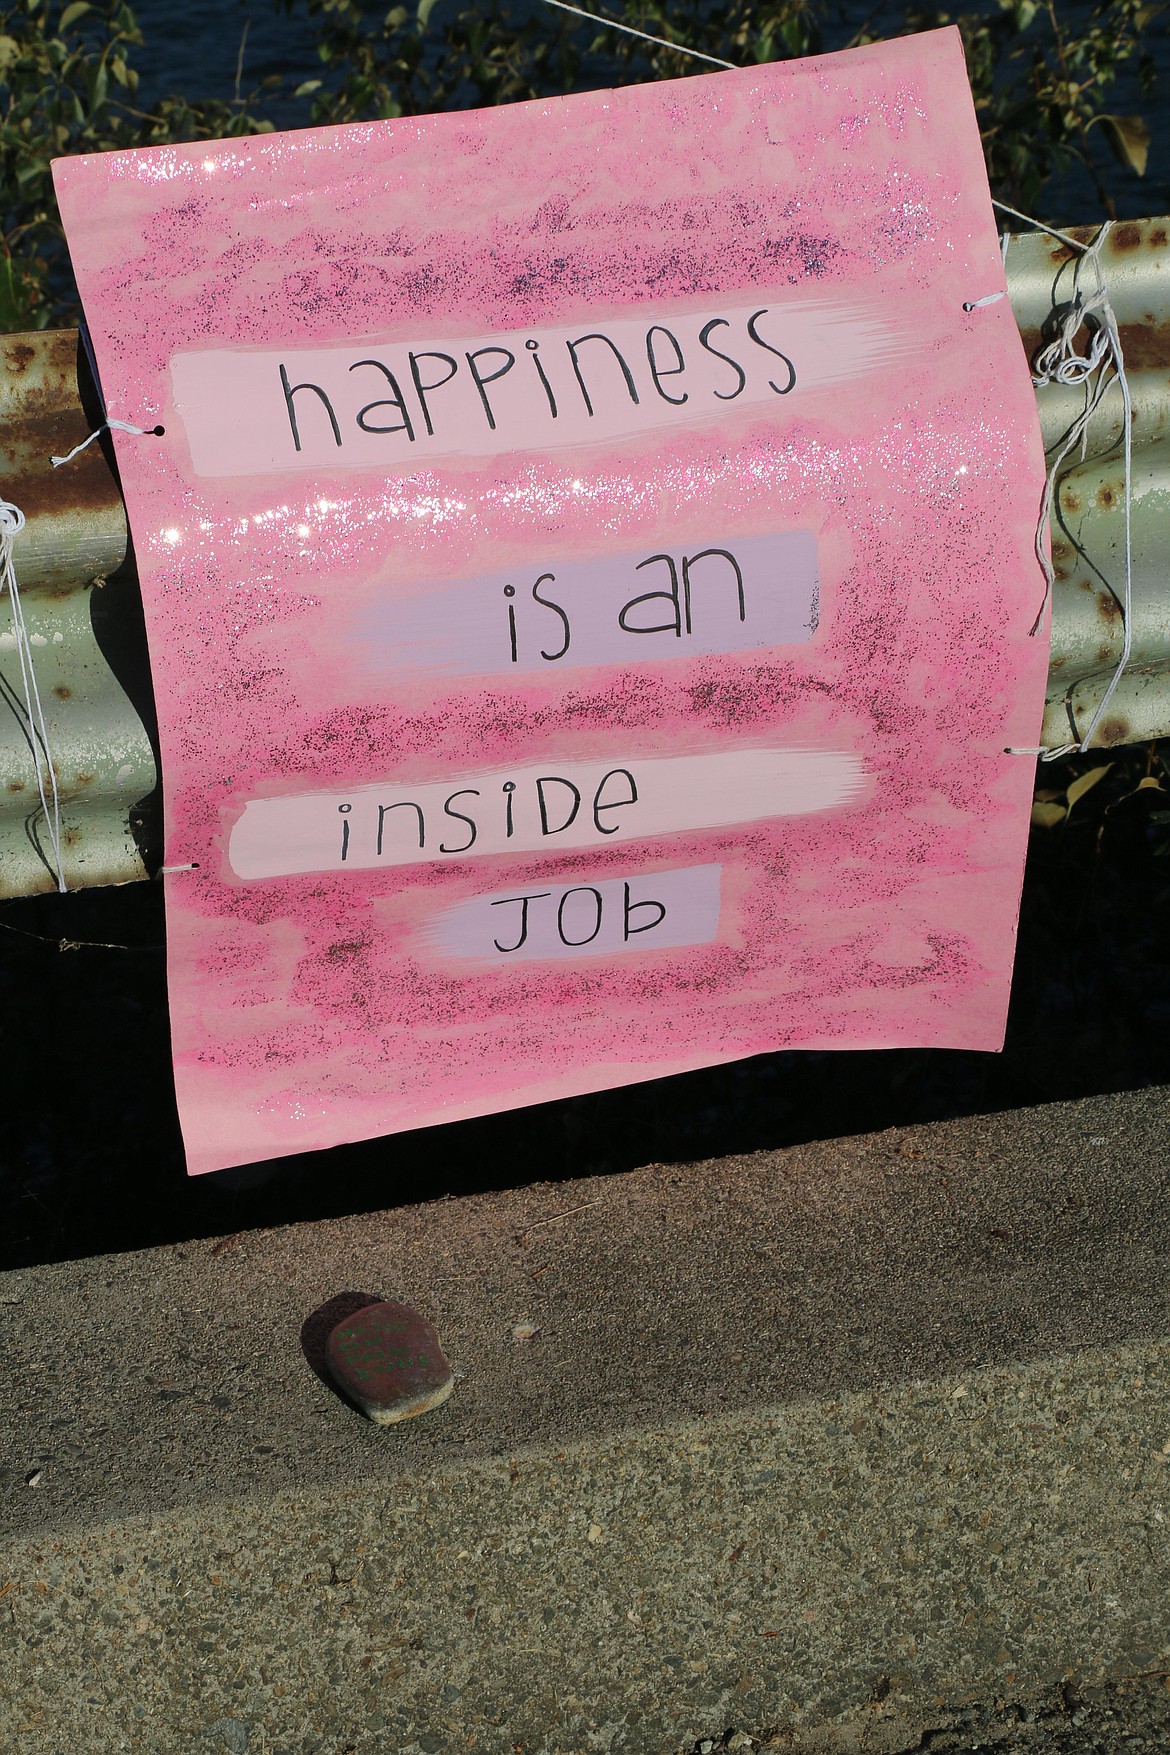 One of the signs placed along the Long Bridge walking bridge during Sunday's Walk for HOPE.